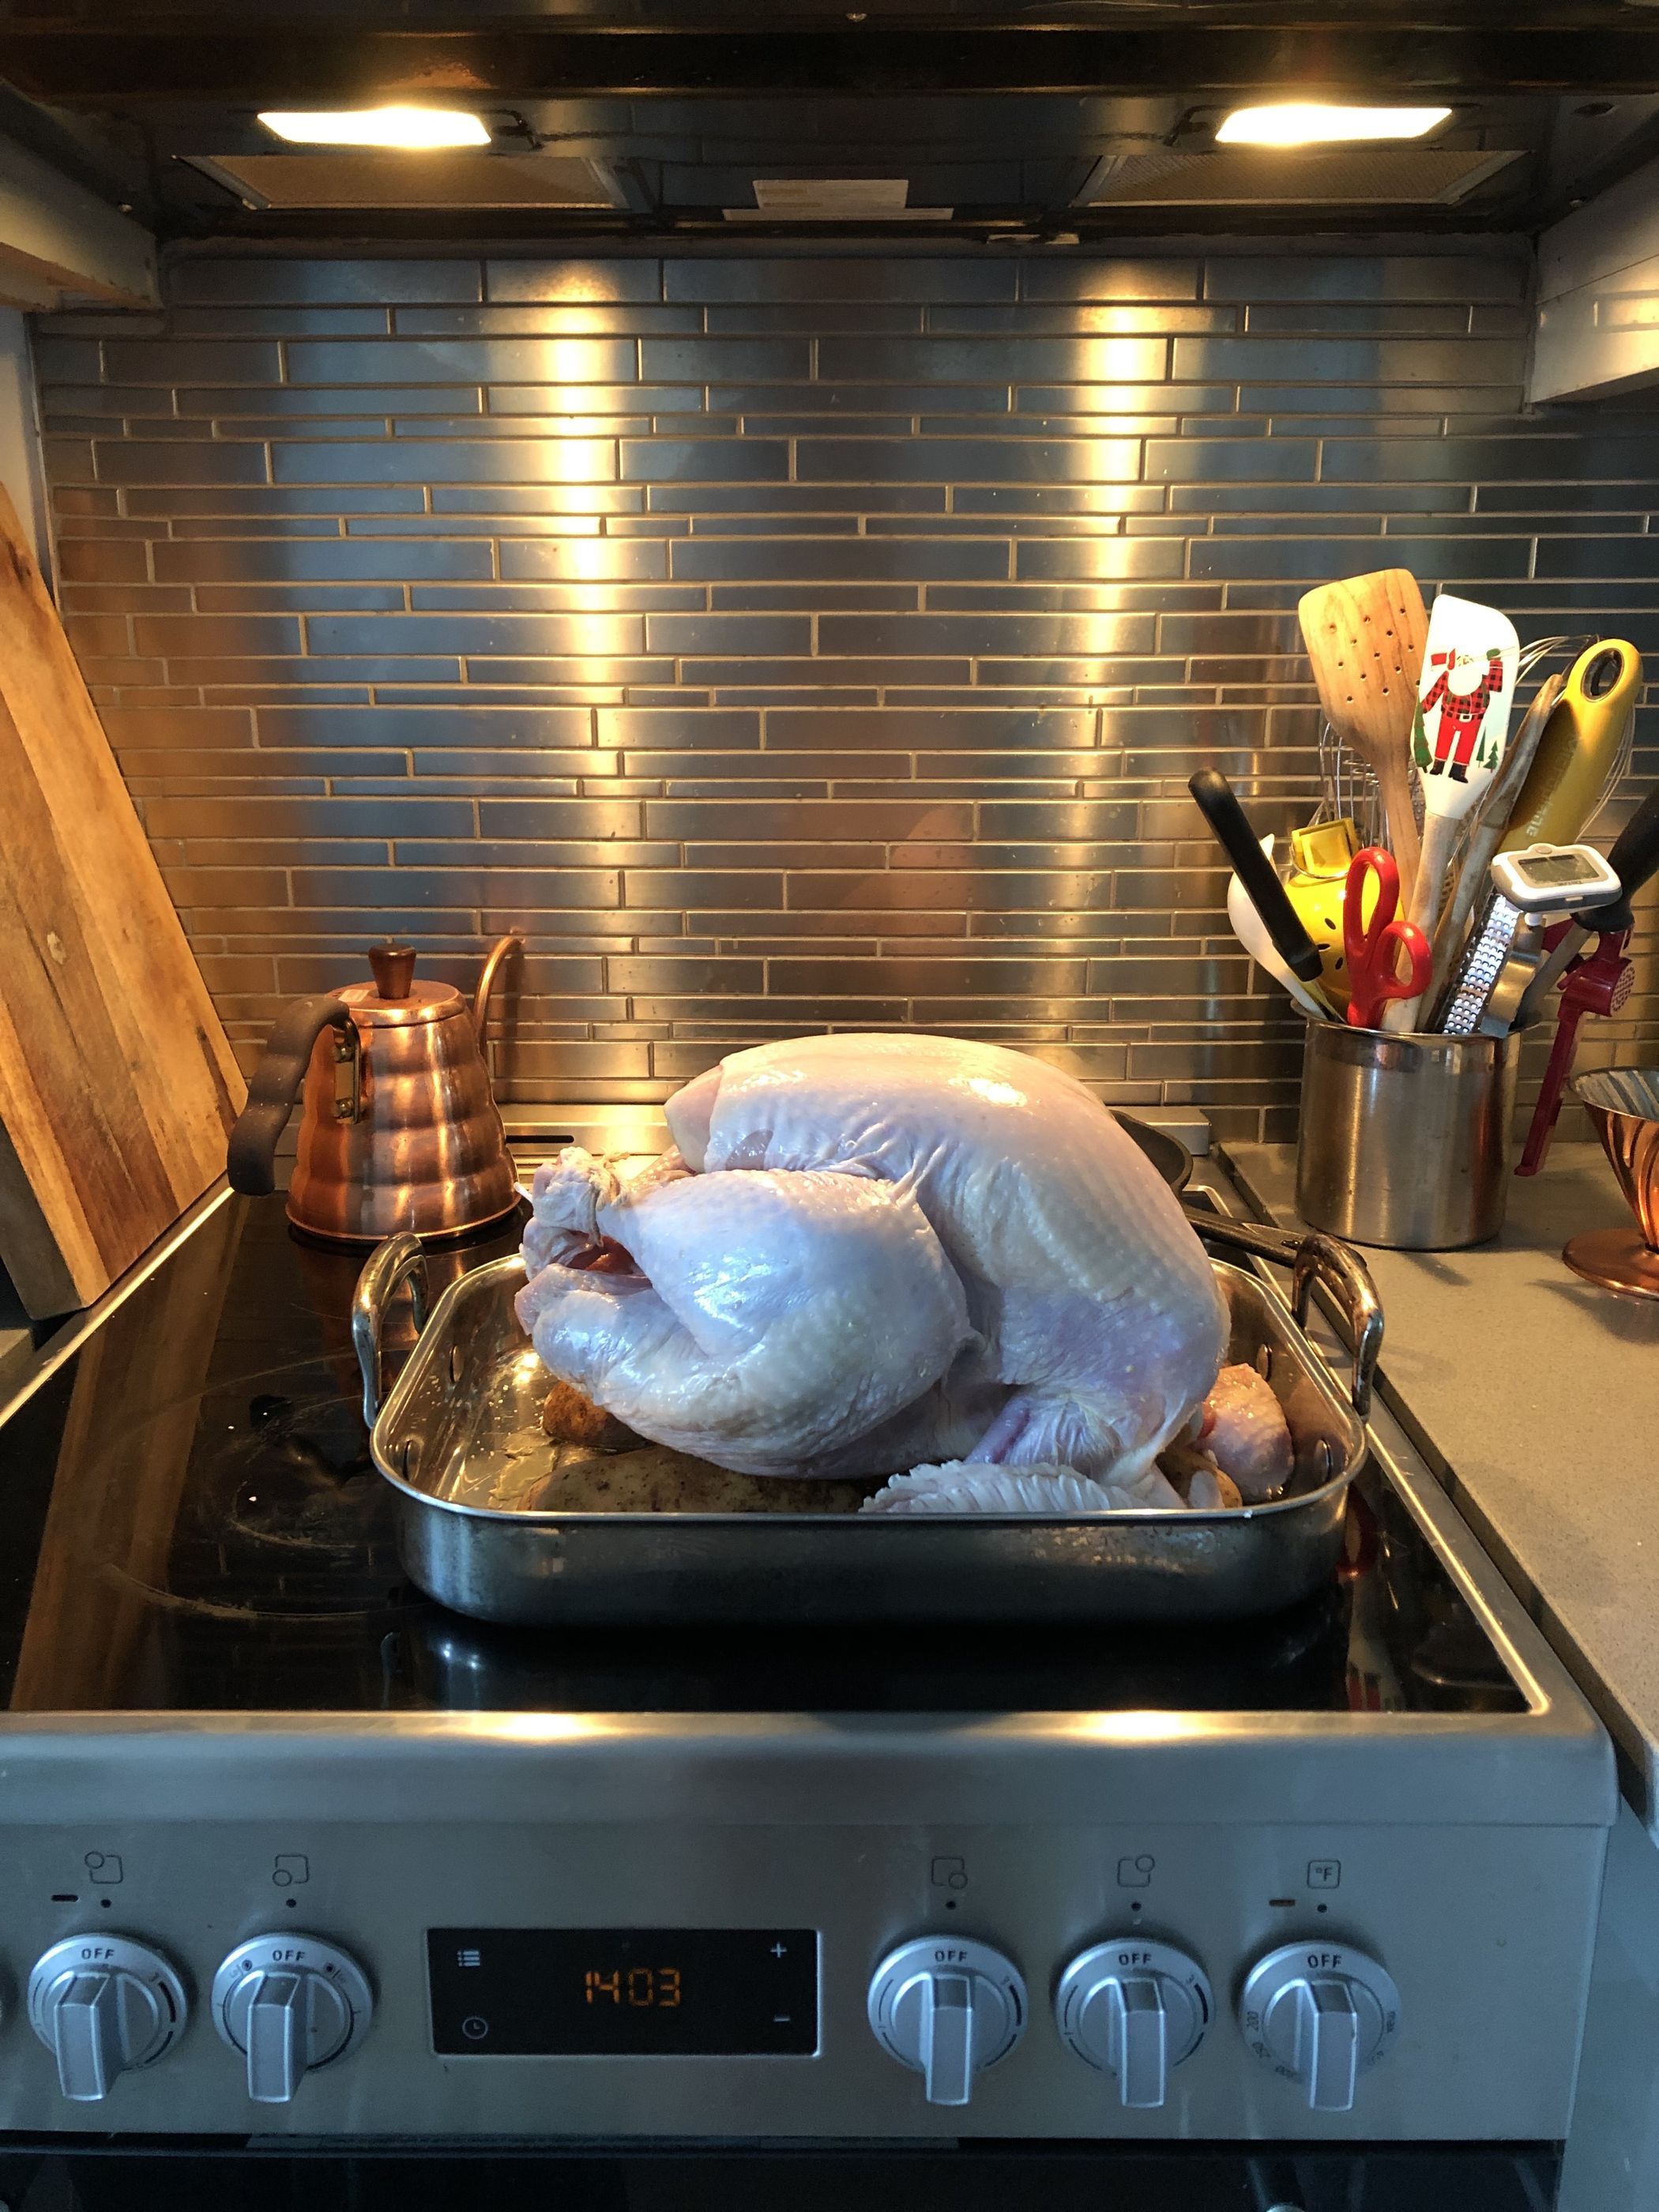 How to Cook a Turkey (& None of That Other Mumbo Jumbo)